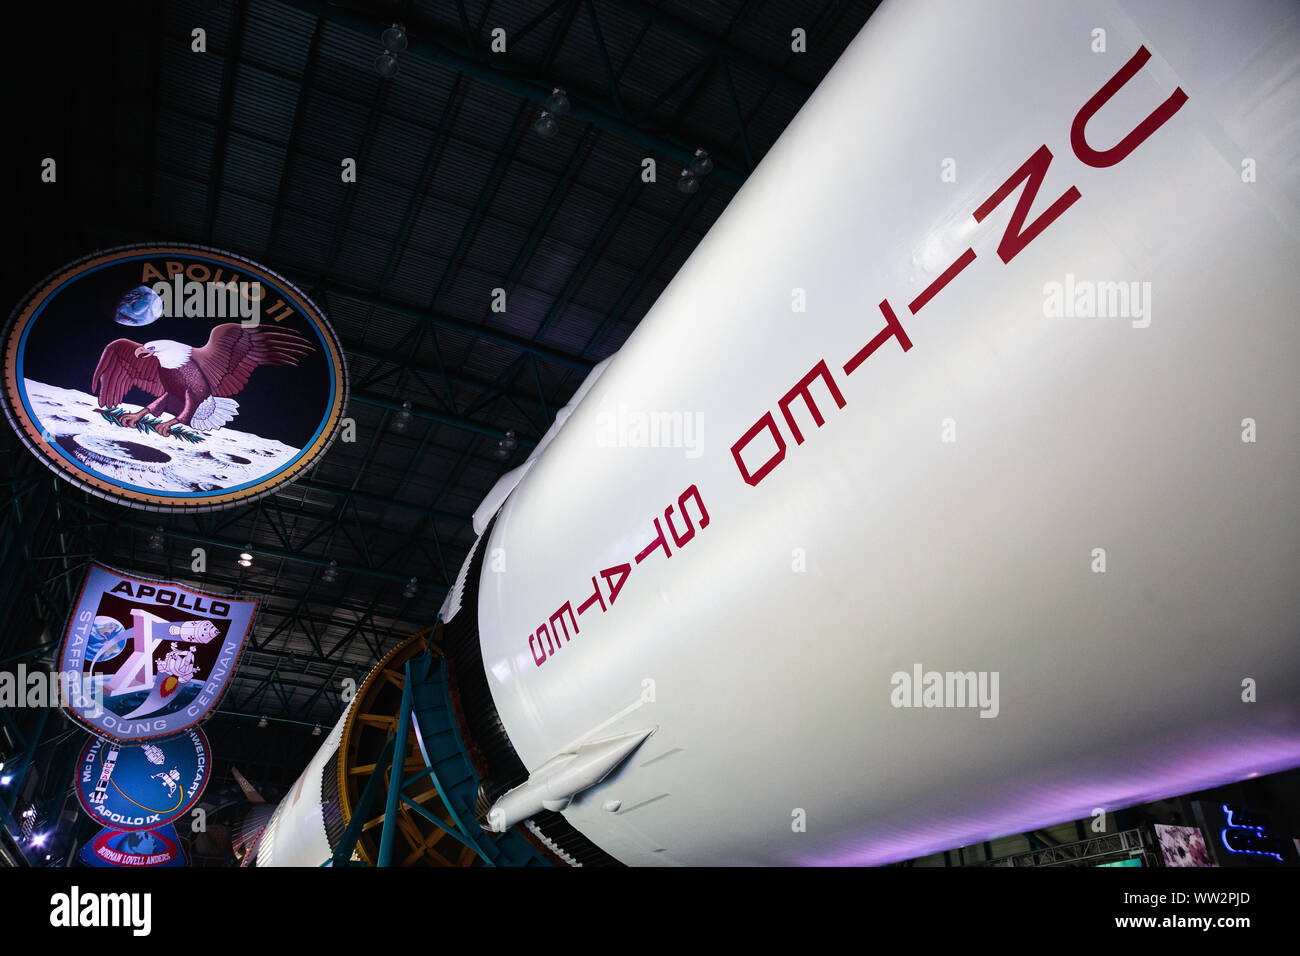 Saturn V rocket exhibit at Kennedy Space Centre, Florida Stock Photo